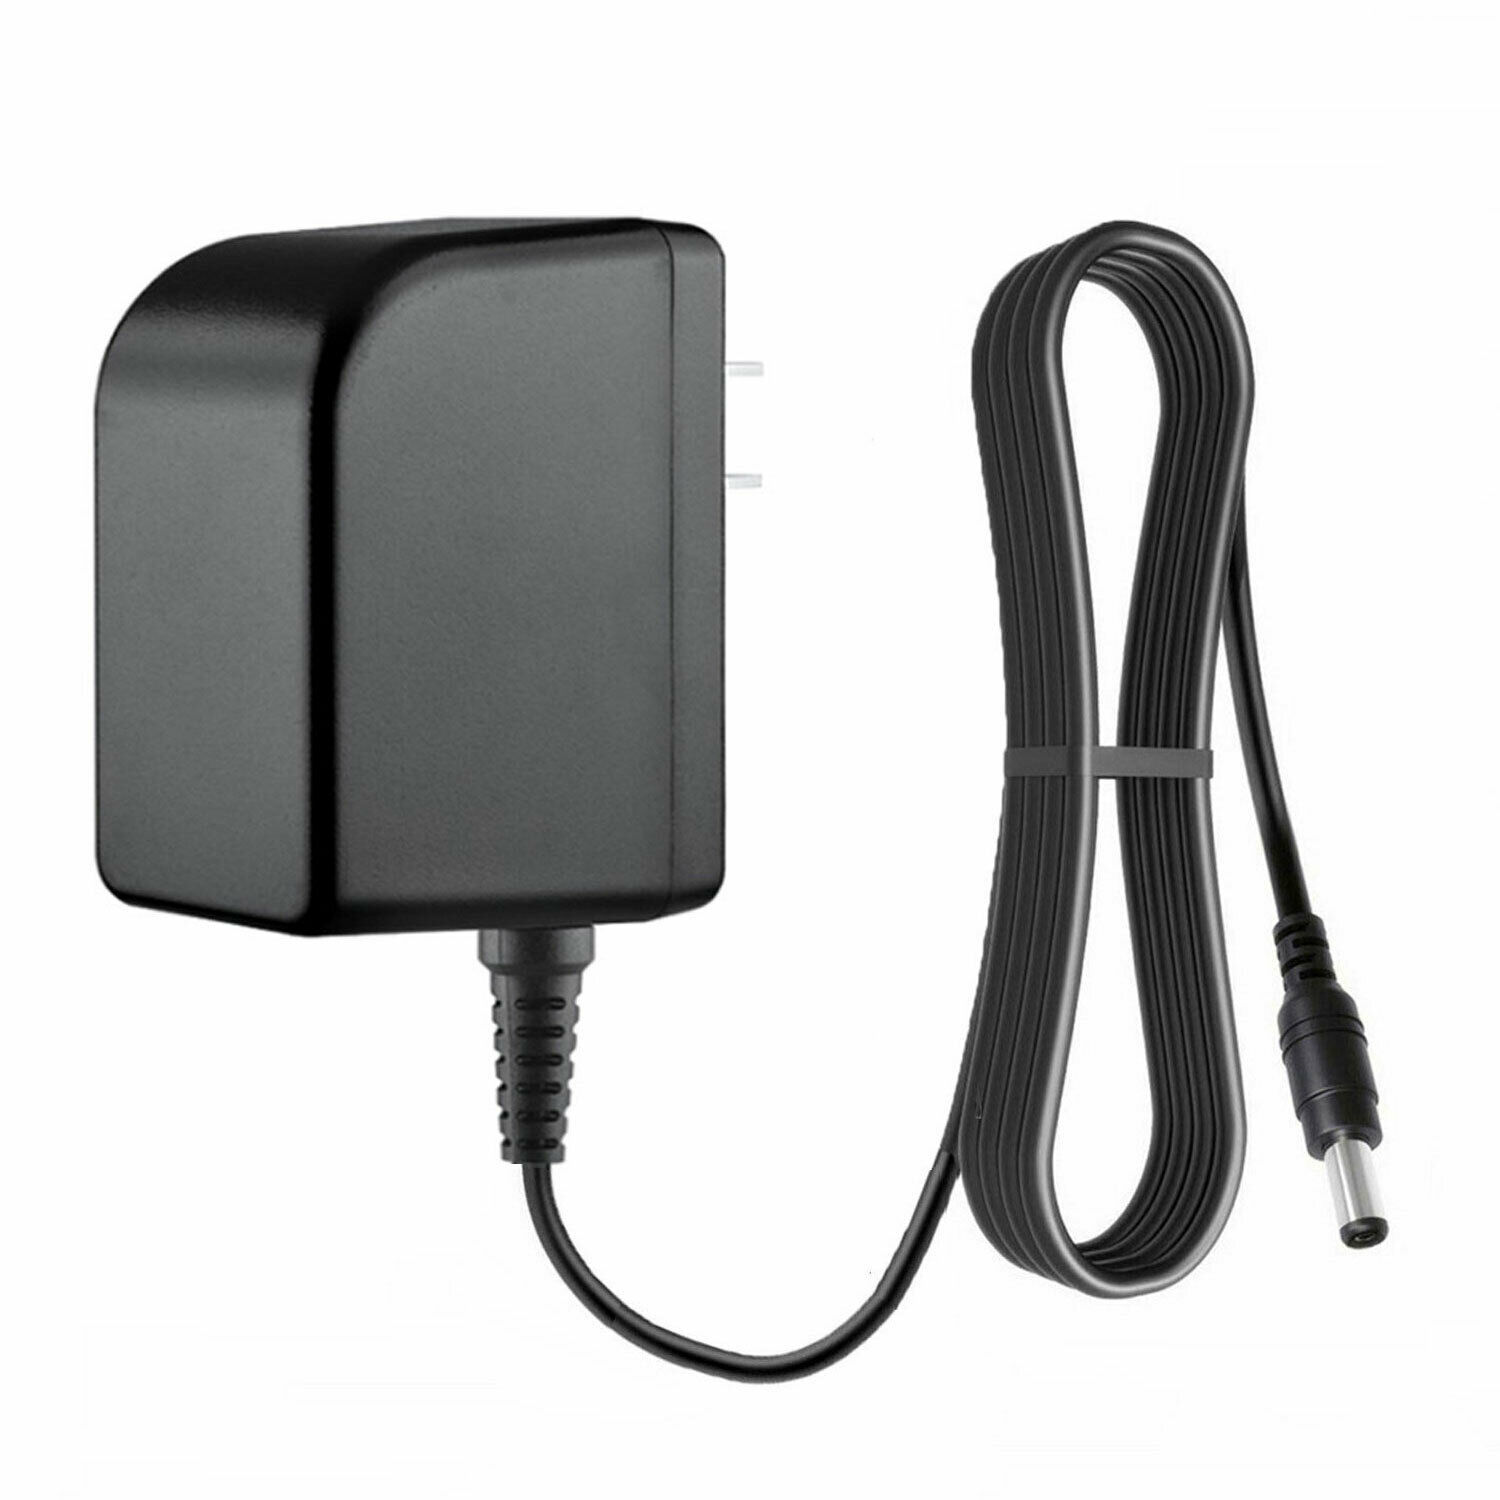 3A AC Wall Charger Adapter Power for Epik Teqnio ELL1201T ELL1401BK laptop Connecter Size: Round tip Cable Length: 6.6f